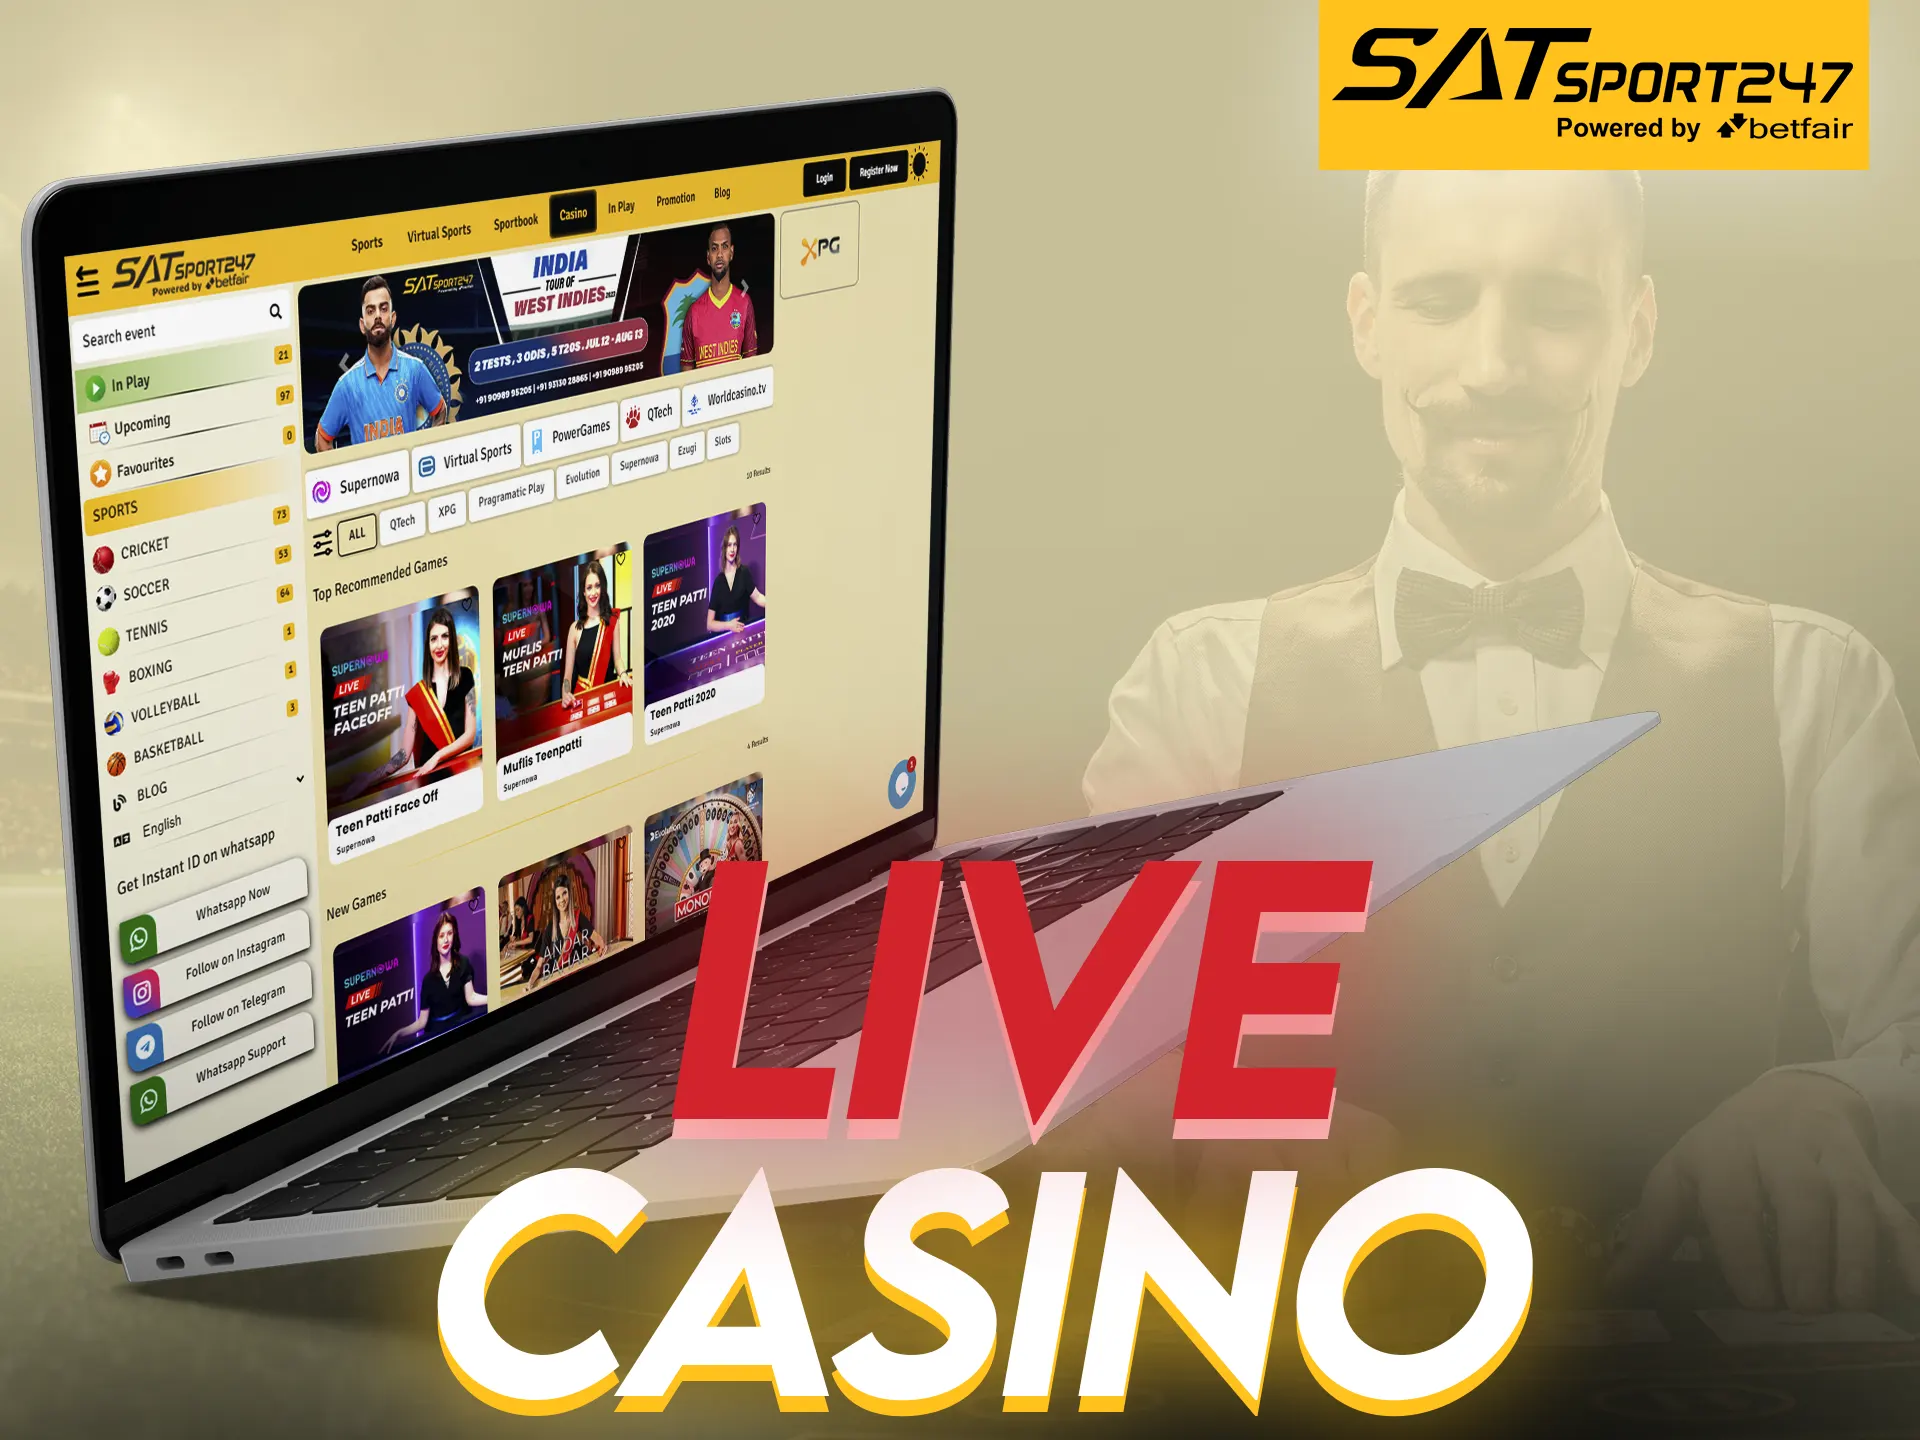 Satsport247 offers to play with dealers in the live casino.